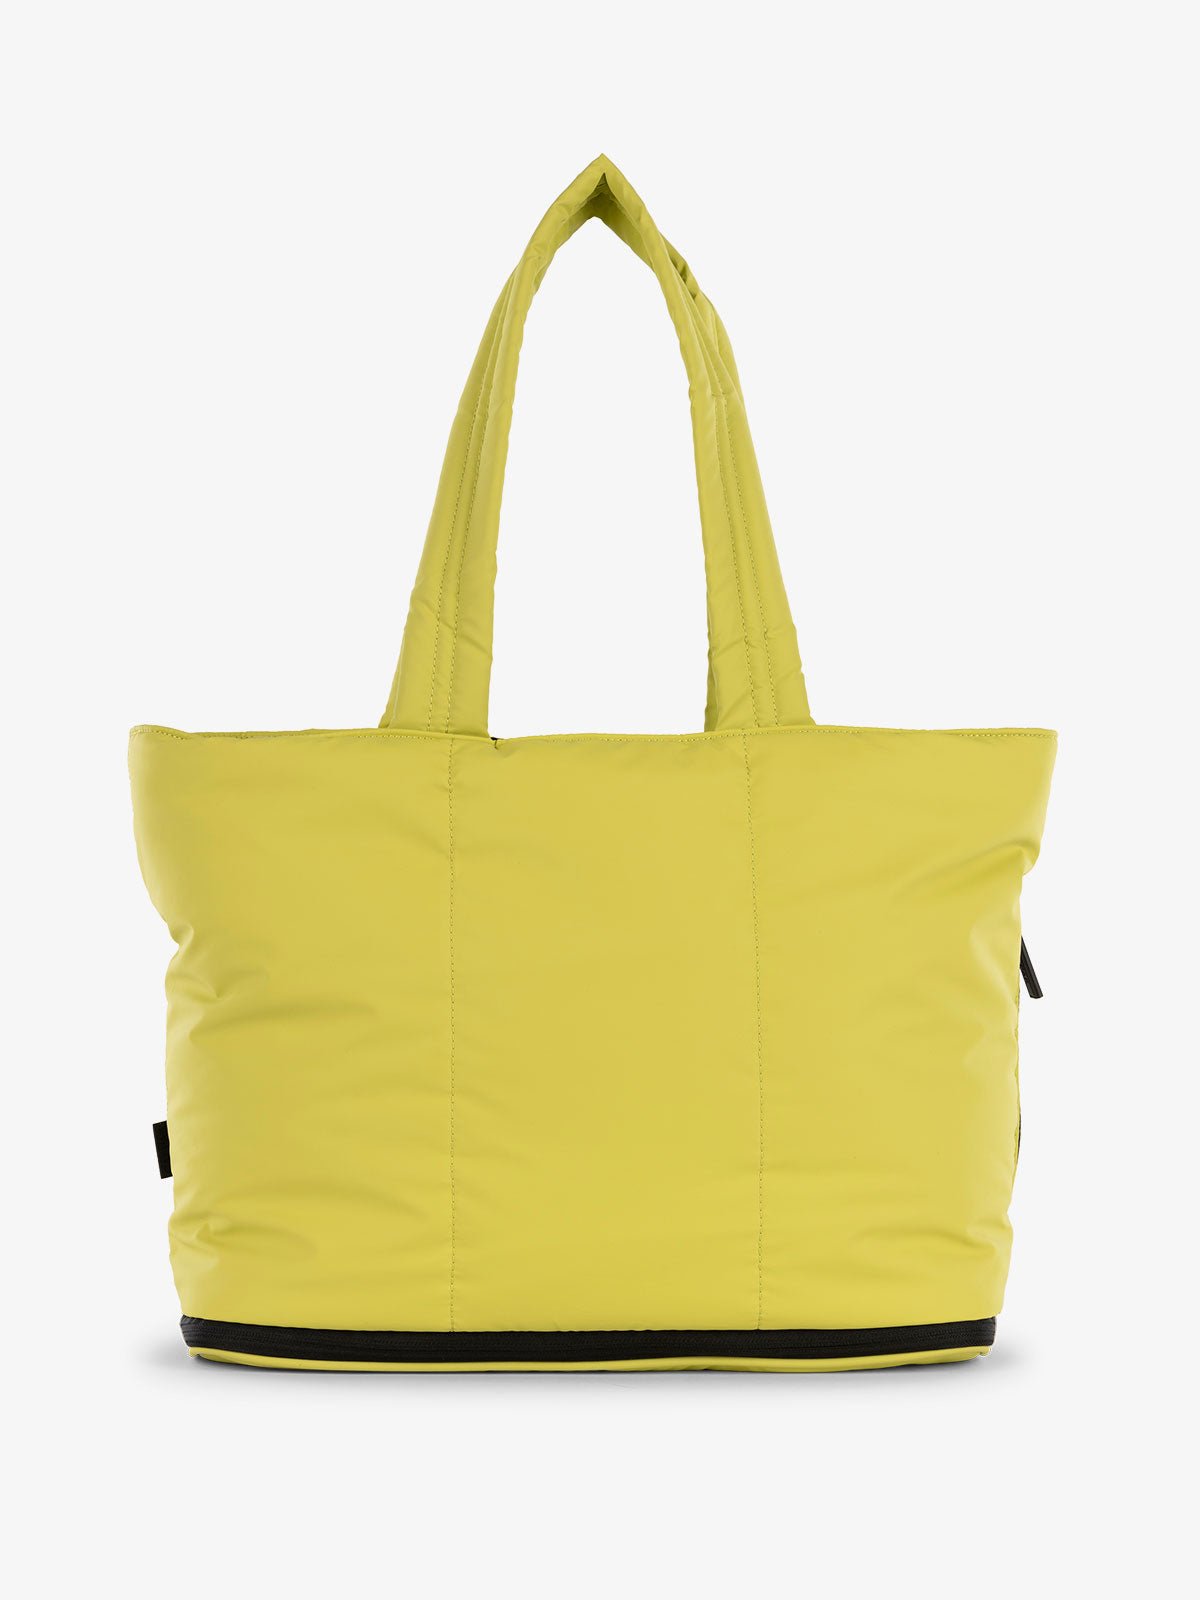 CALPAK Luka expandable tote bag with laptop compartment in yellow green